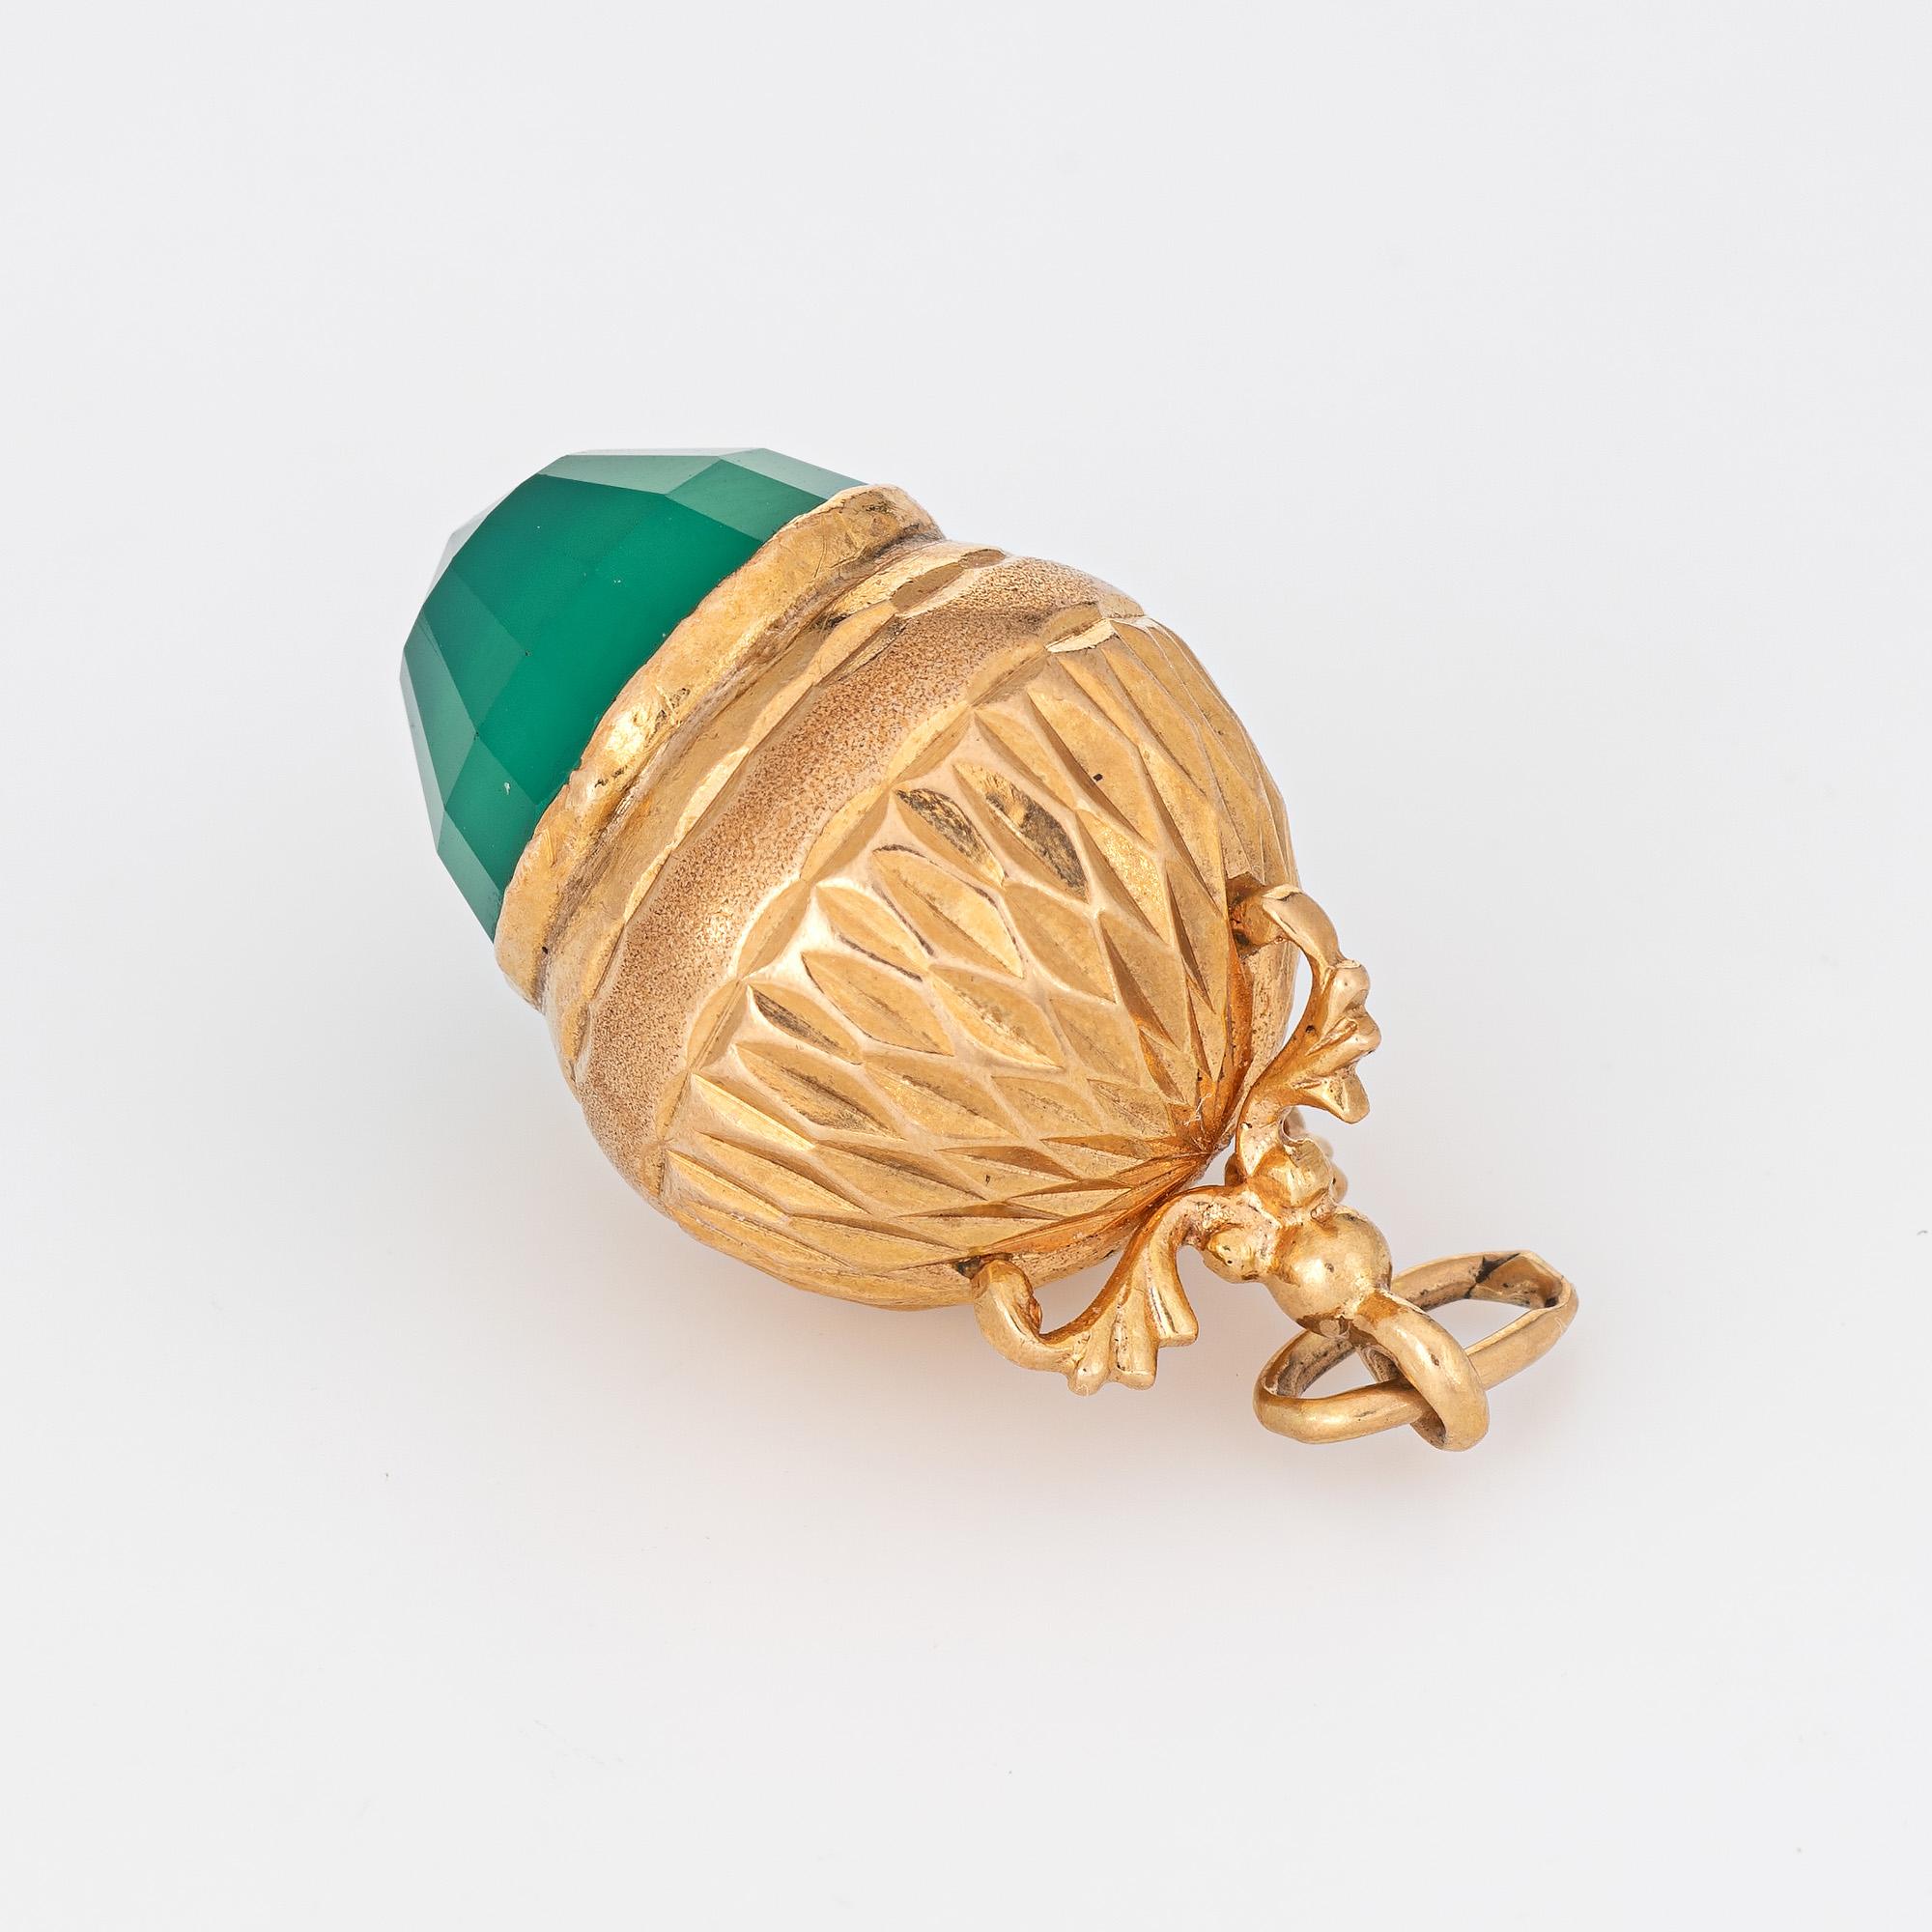 Finely detailed vintage acorn charm crafted in 14k yellow gold (circa 1960s).  

Faceted chrysoprase measures 12mm (in very good condition and free of cracks or chips).

The acorn is rendered in lifelike detail with the faceted chrysoprase offering